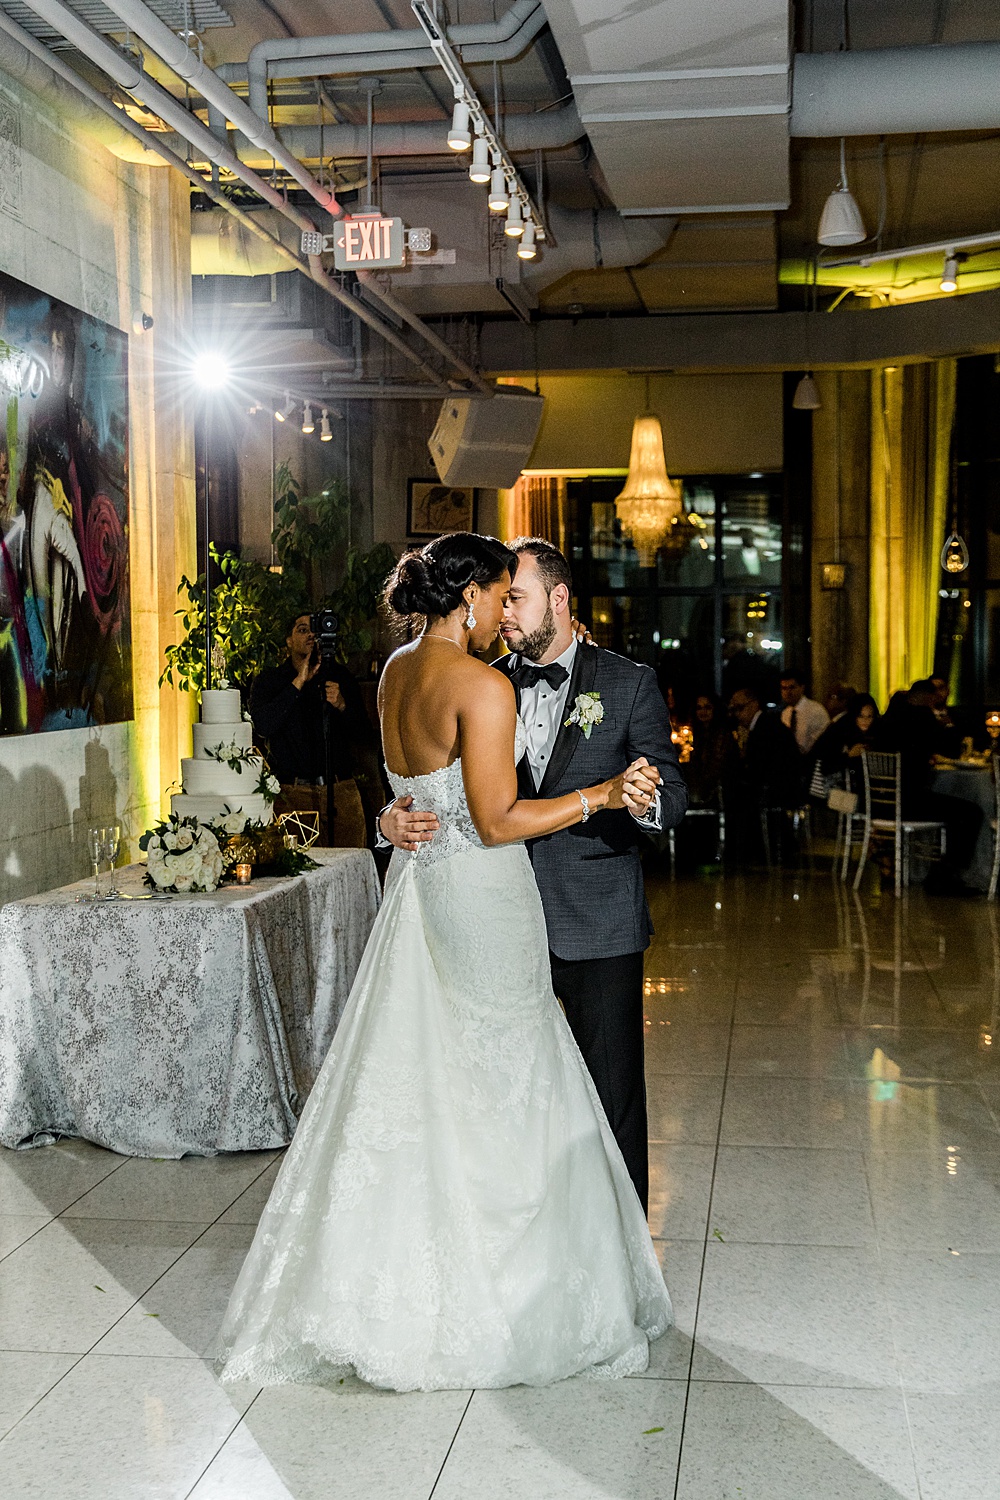 La Vie Wedding Reception in Washington, DC, Event Planning by Bright Occasions, Photography by Iris Mannings